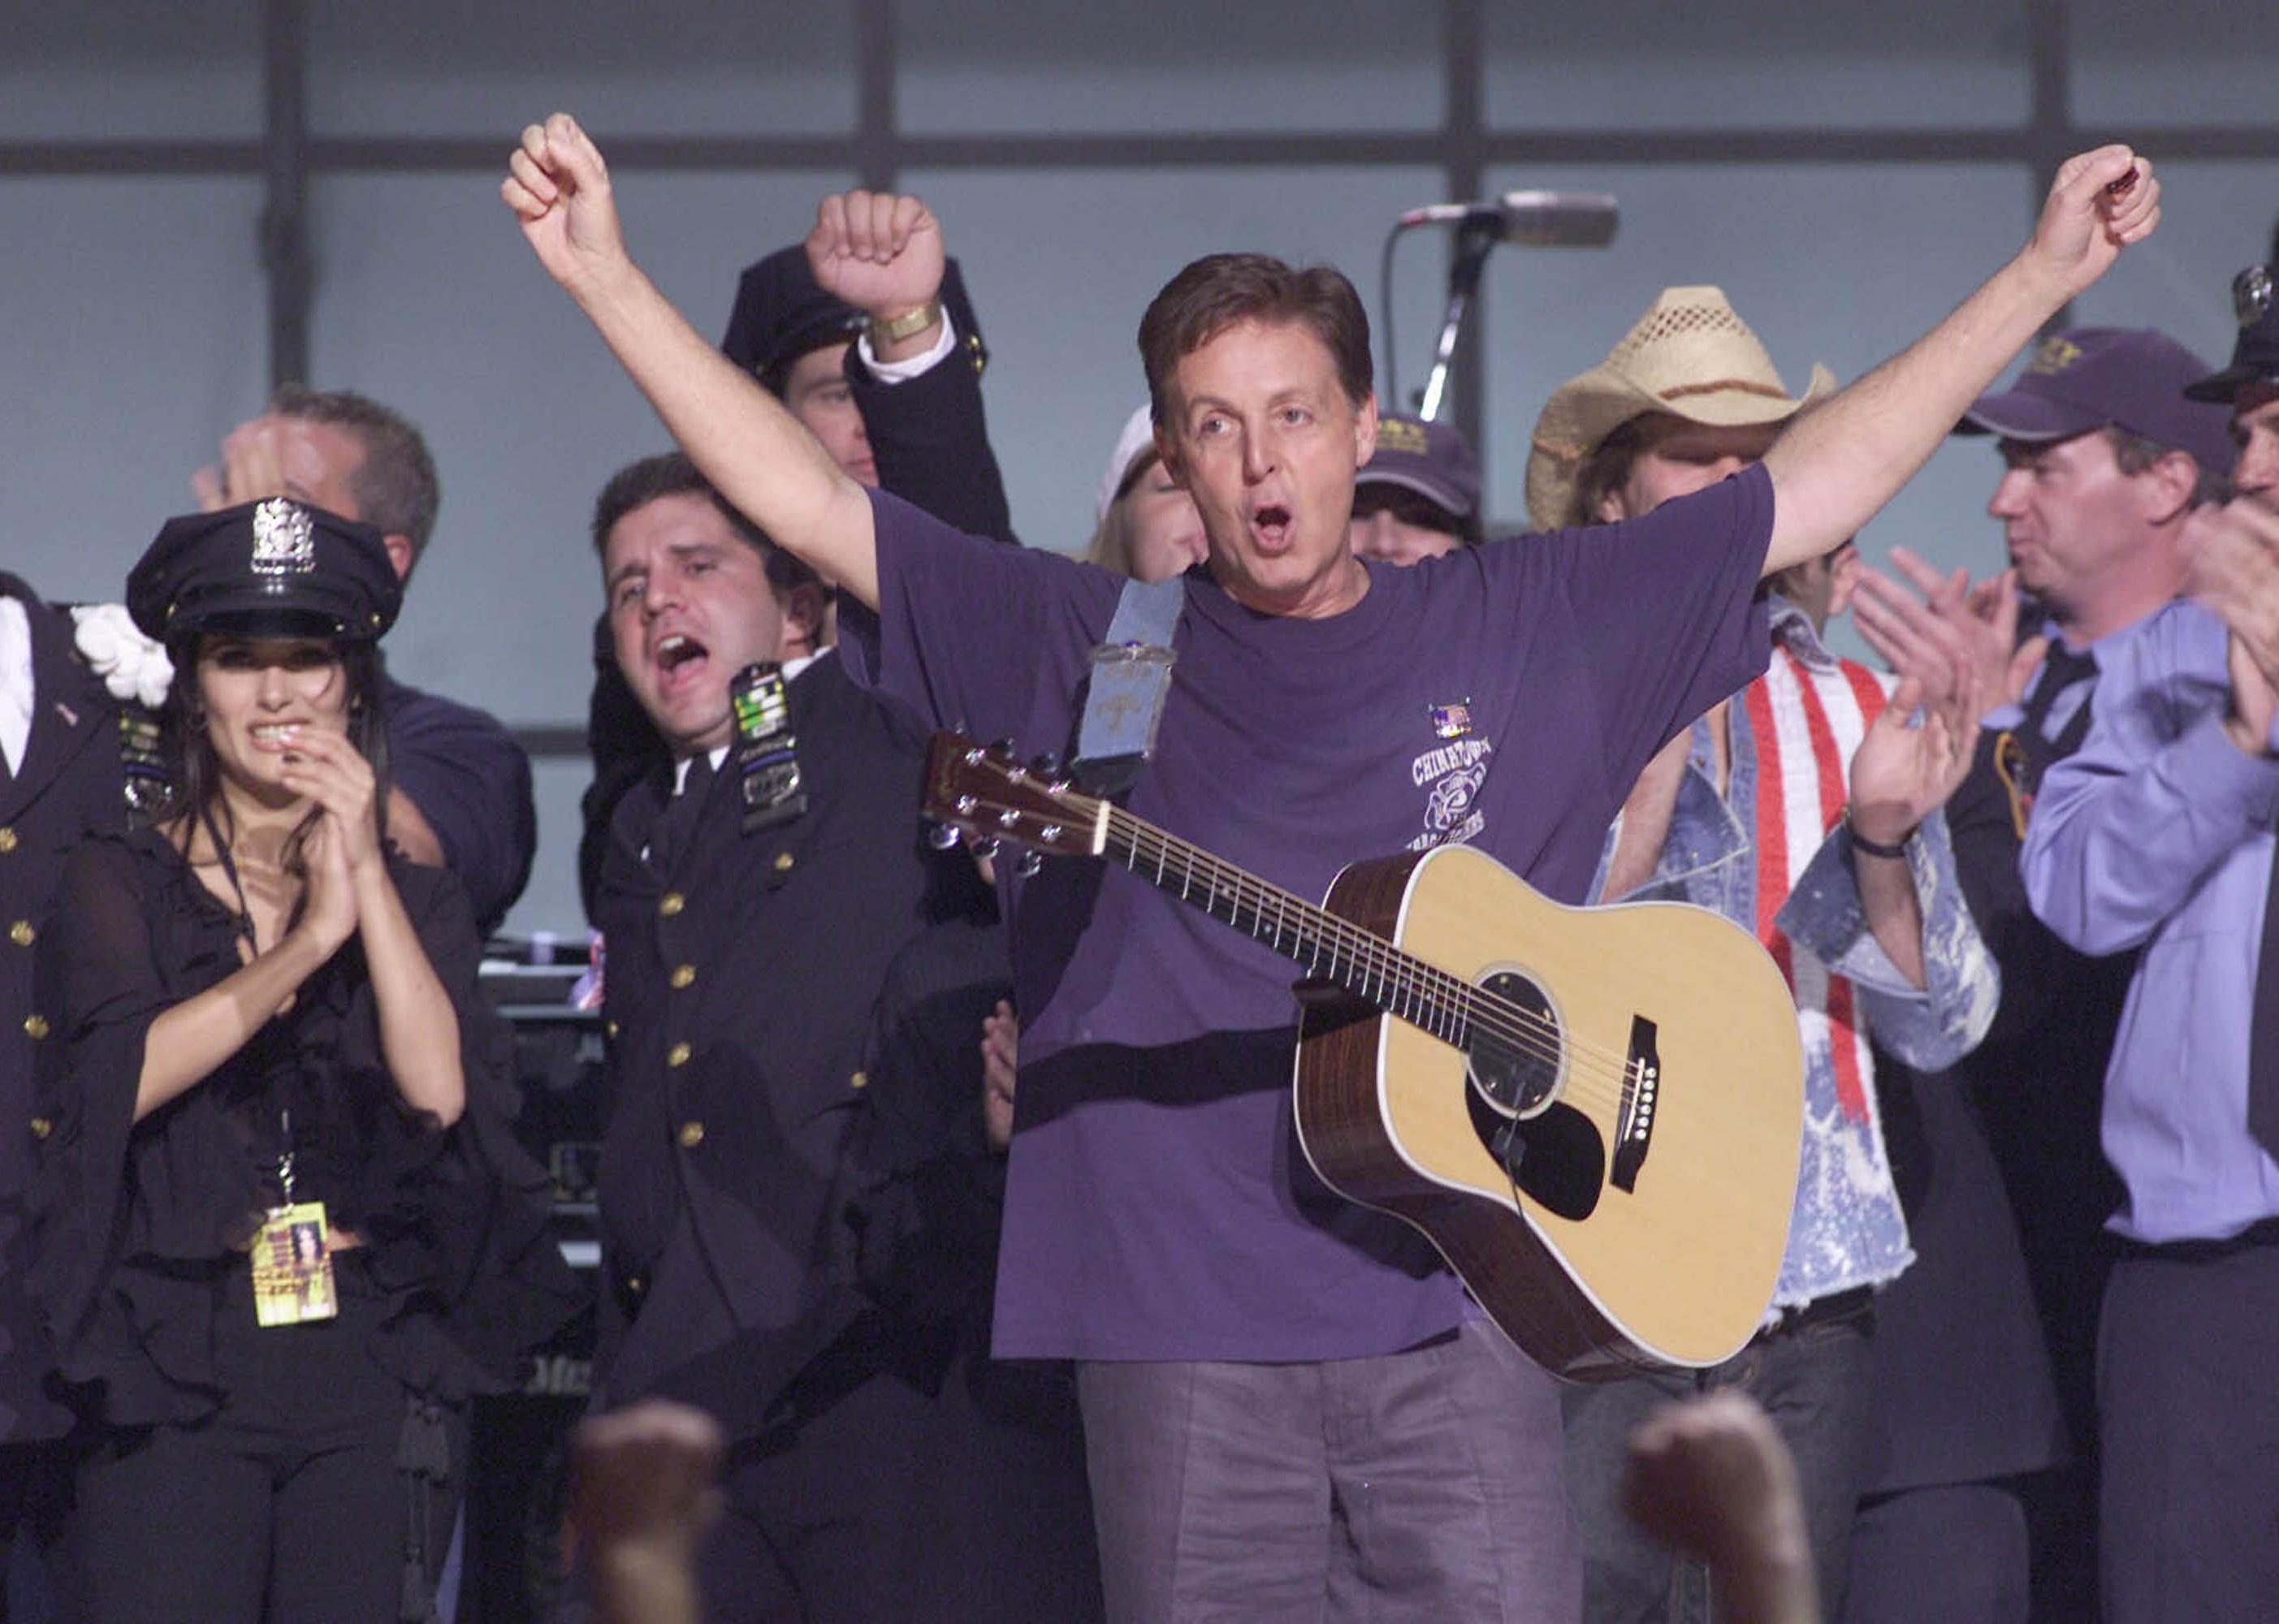 Paul McCartney performs on stage alongside other artists at The Concert for New York City.